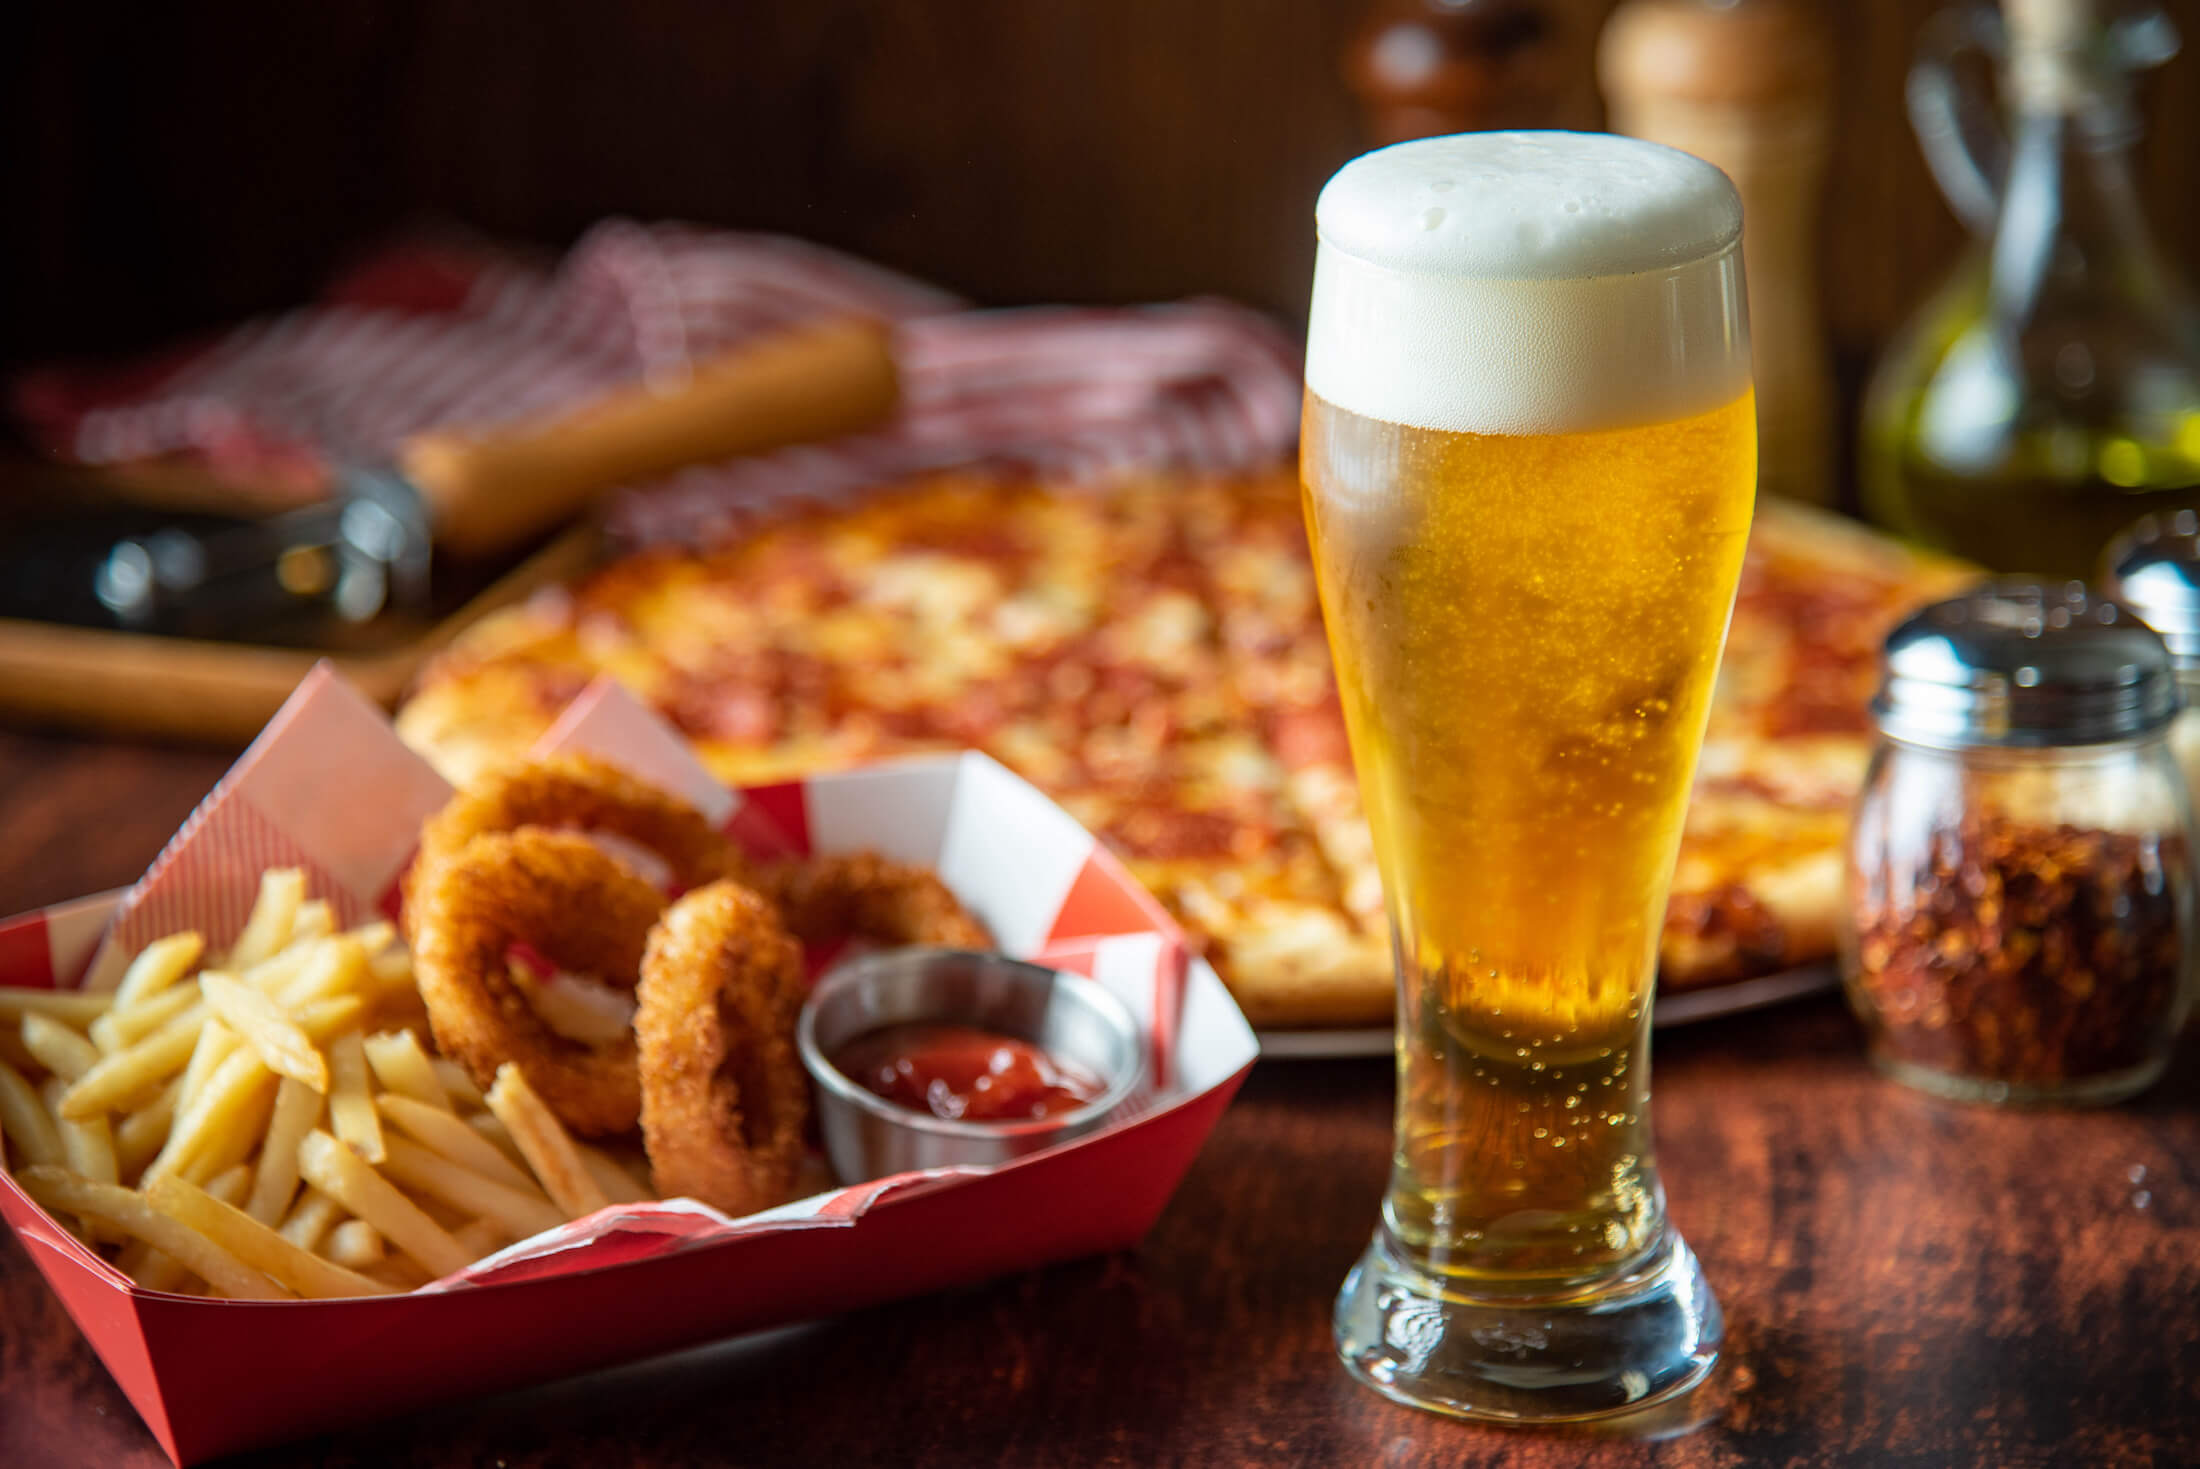 Beer, onion rings, fries, and pizza